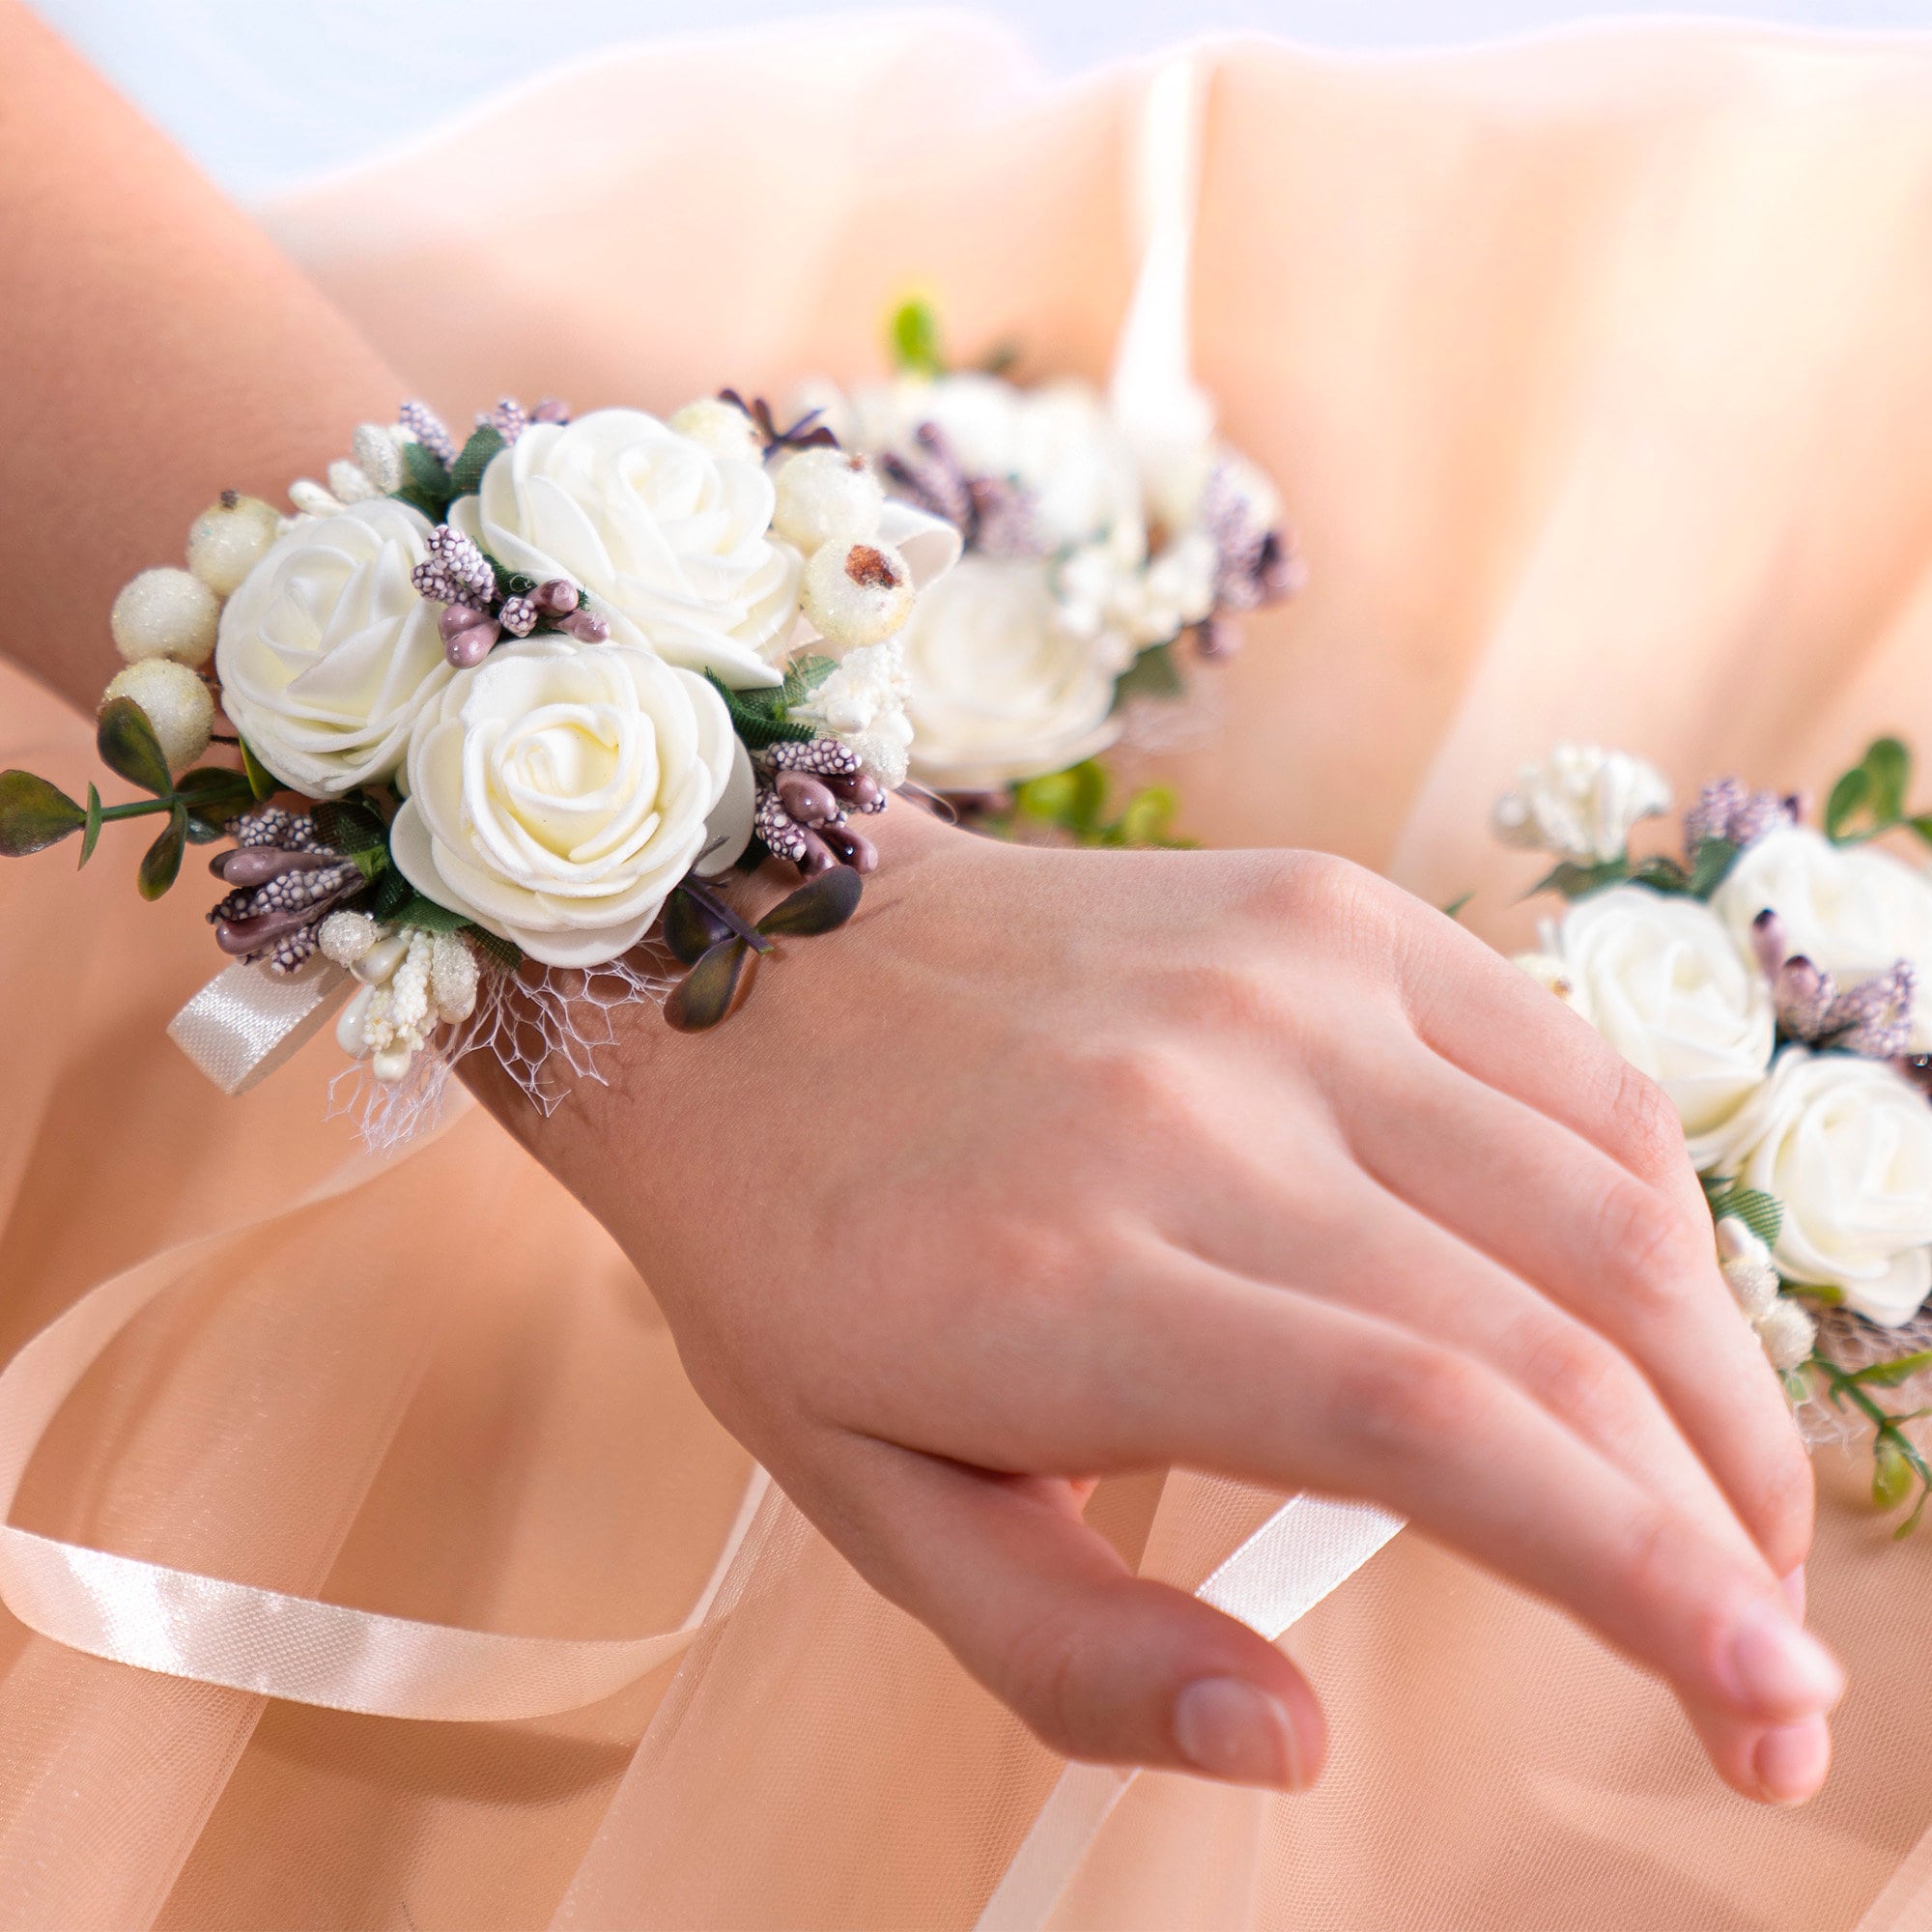 Wrist Flower | Rose Wrist Corsages | Wristband Hand Flowers Wrist Corsage  Bracelets, Corsage Wristlet Band For Wedding Bridesmaid Bridal Shower Prom P